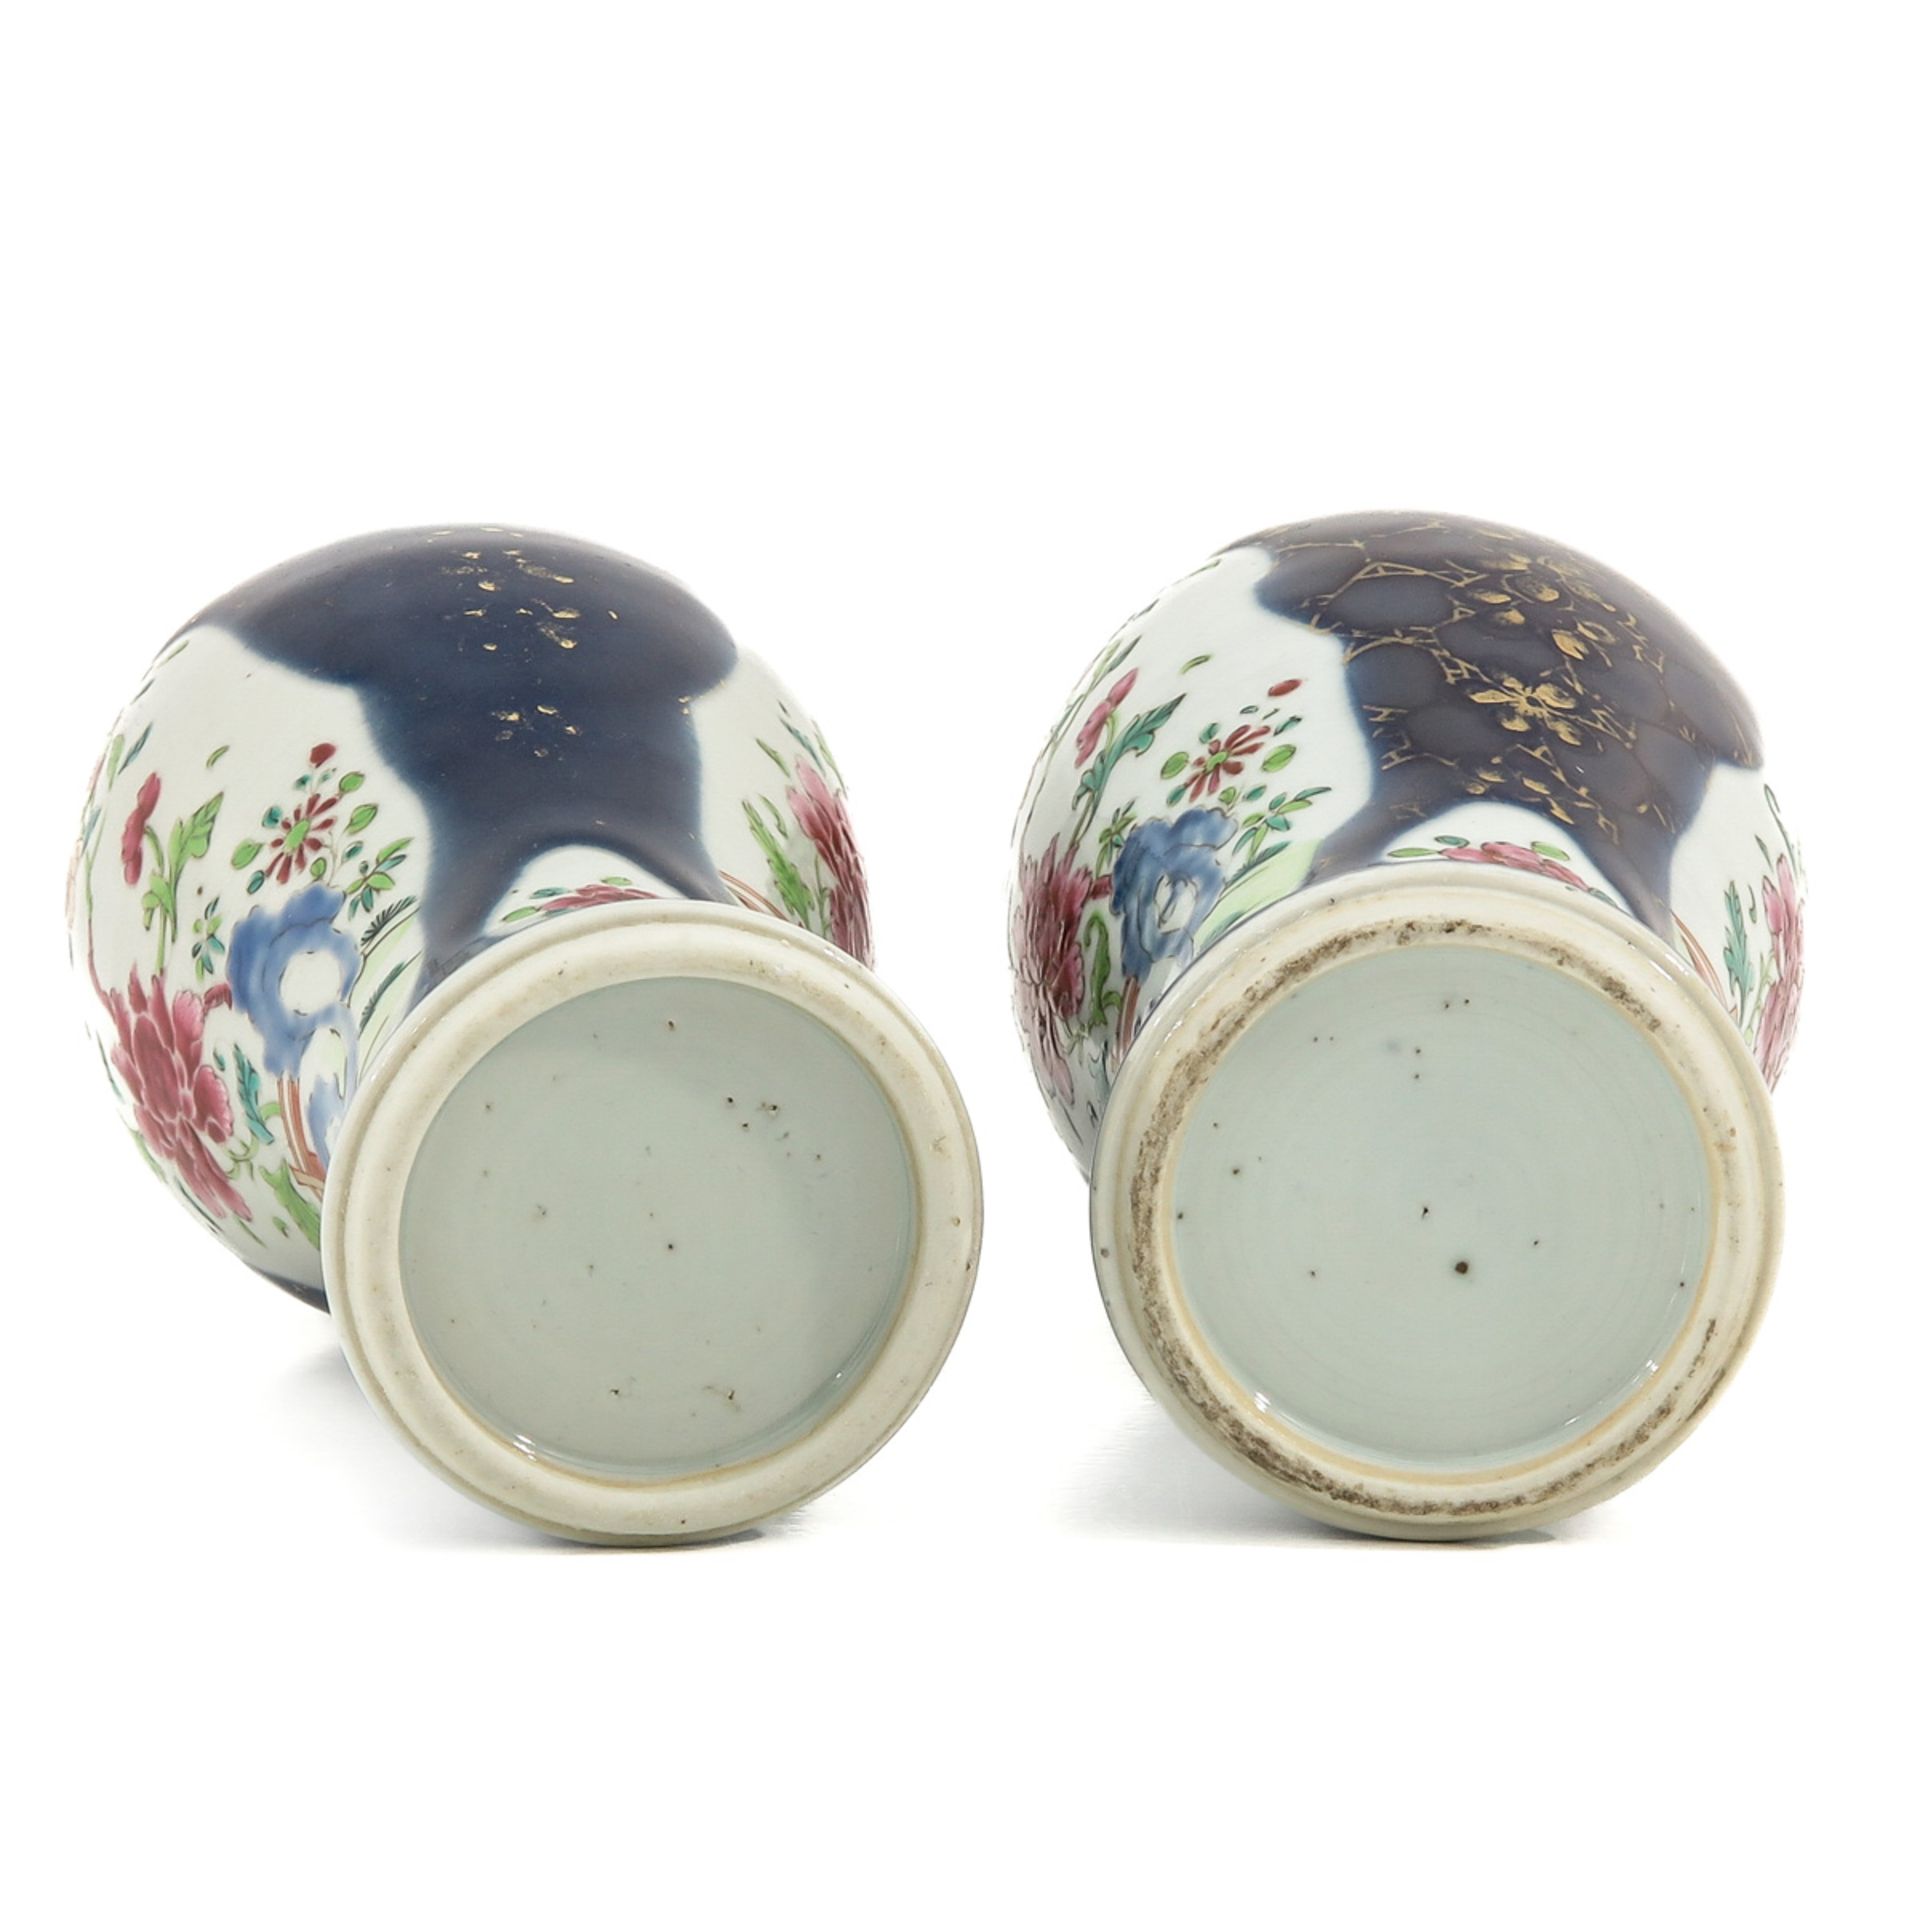 A Pair of Powder Blue Vases - Image 6 of 9